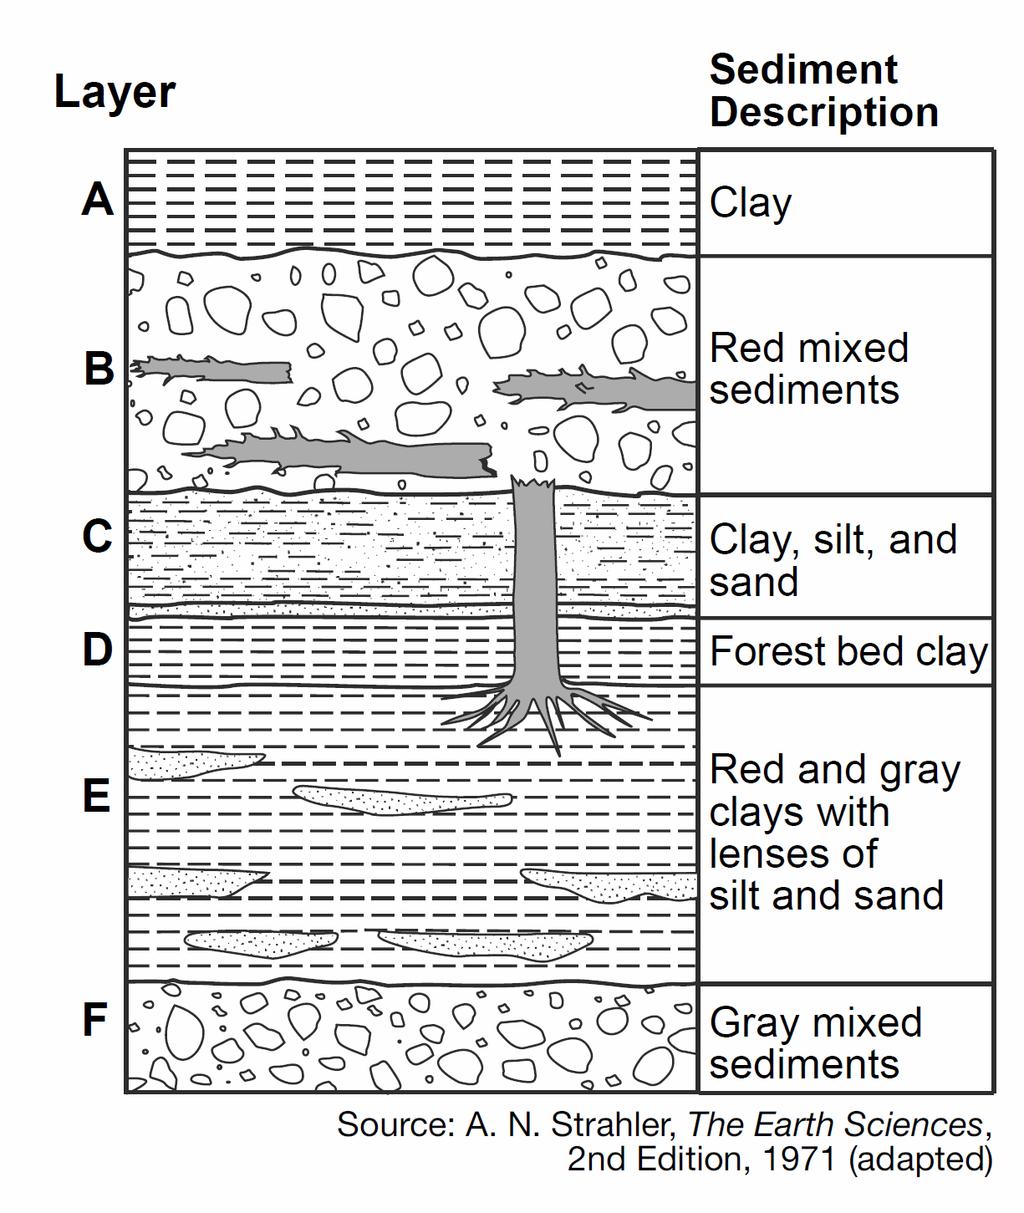 The cross section below shows layers of sediments deposited in a region of Wisconsin that has experienced several periods of glaciation.